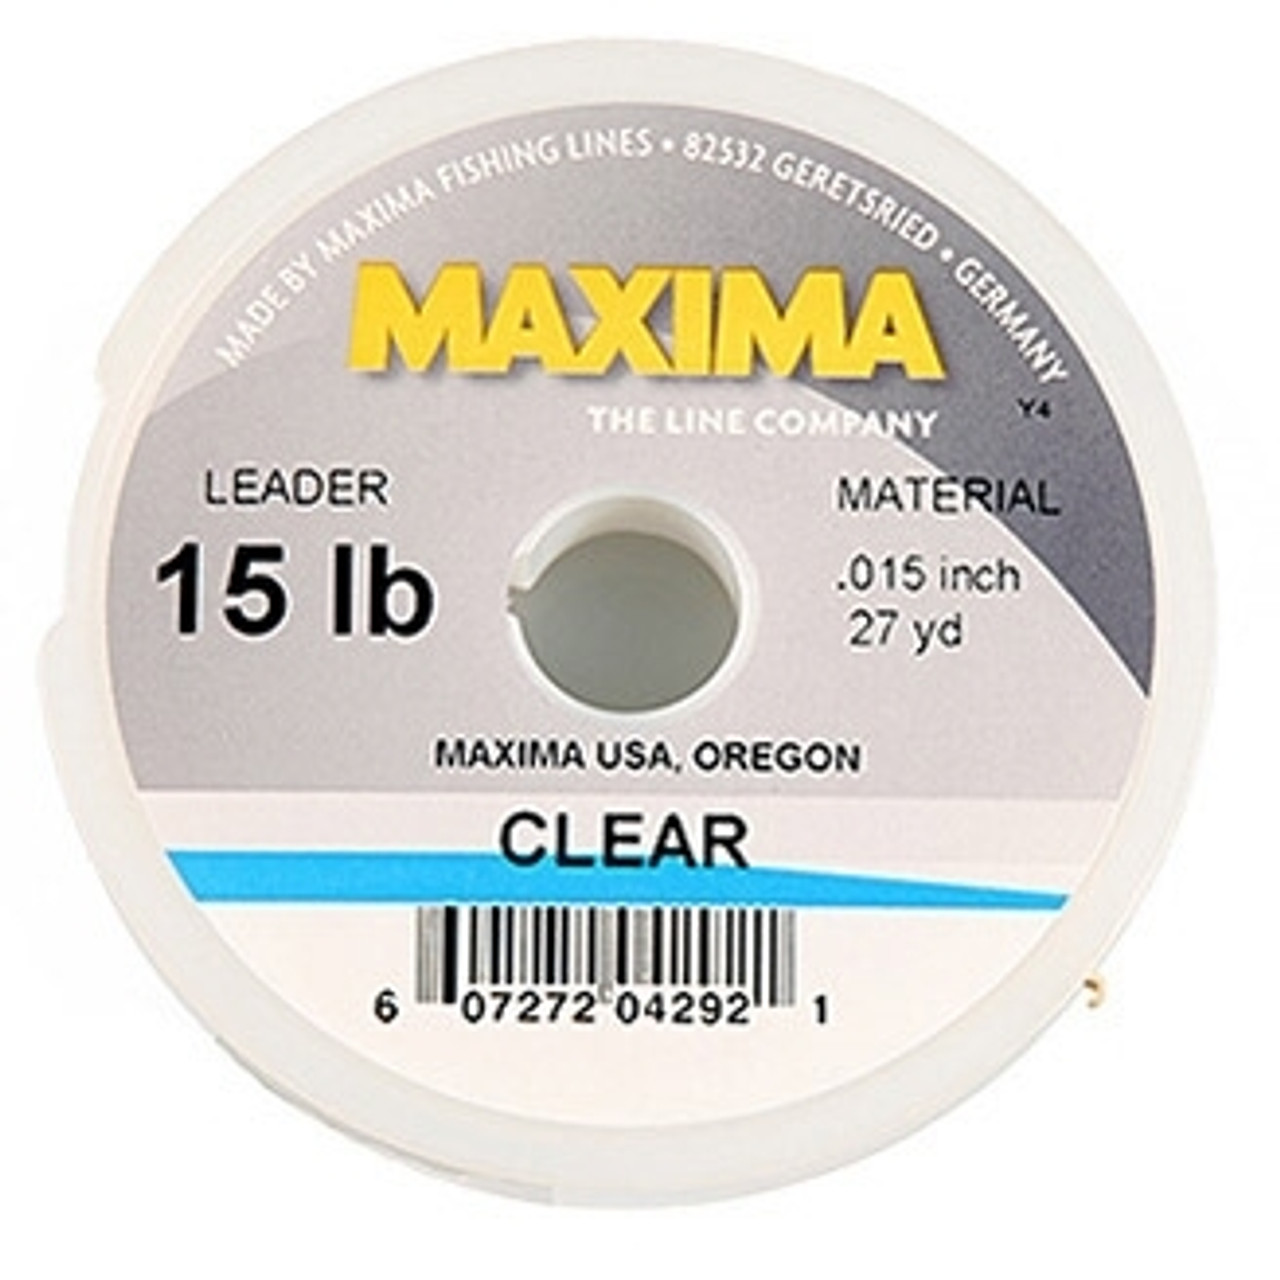 MAXIMA Clear Leader - Pacific Rivers Outfitting Company